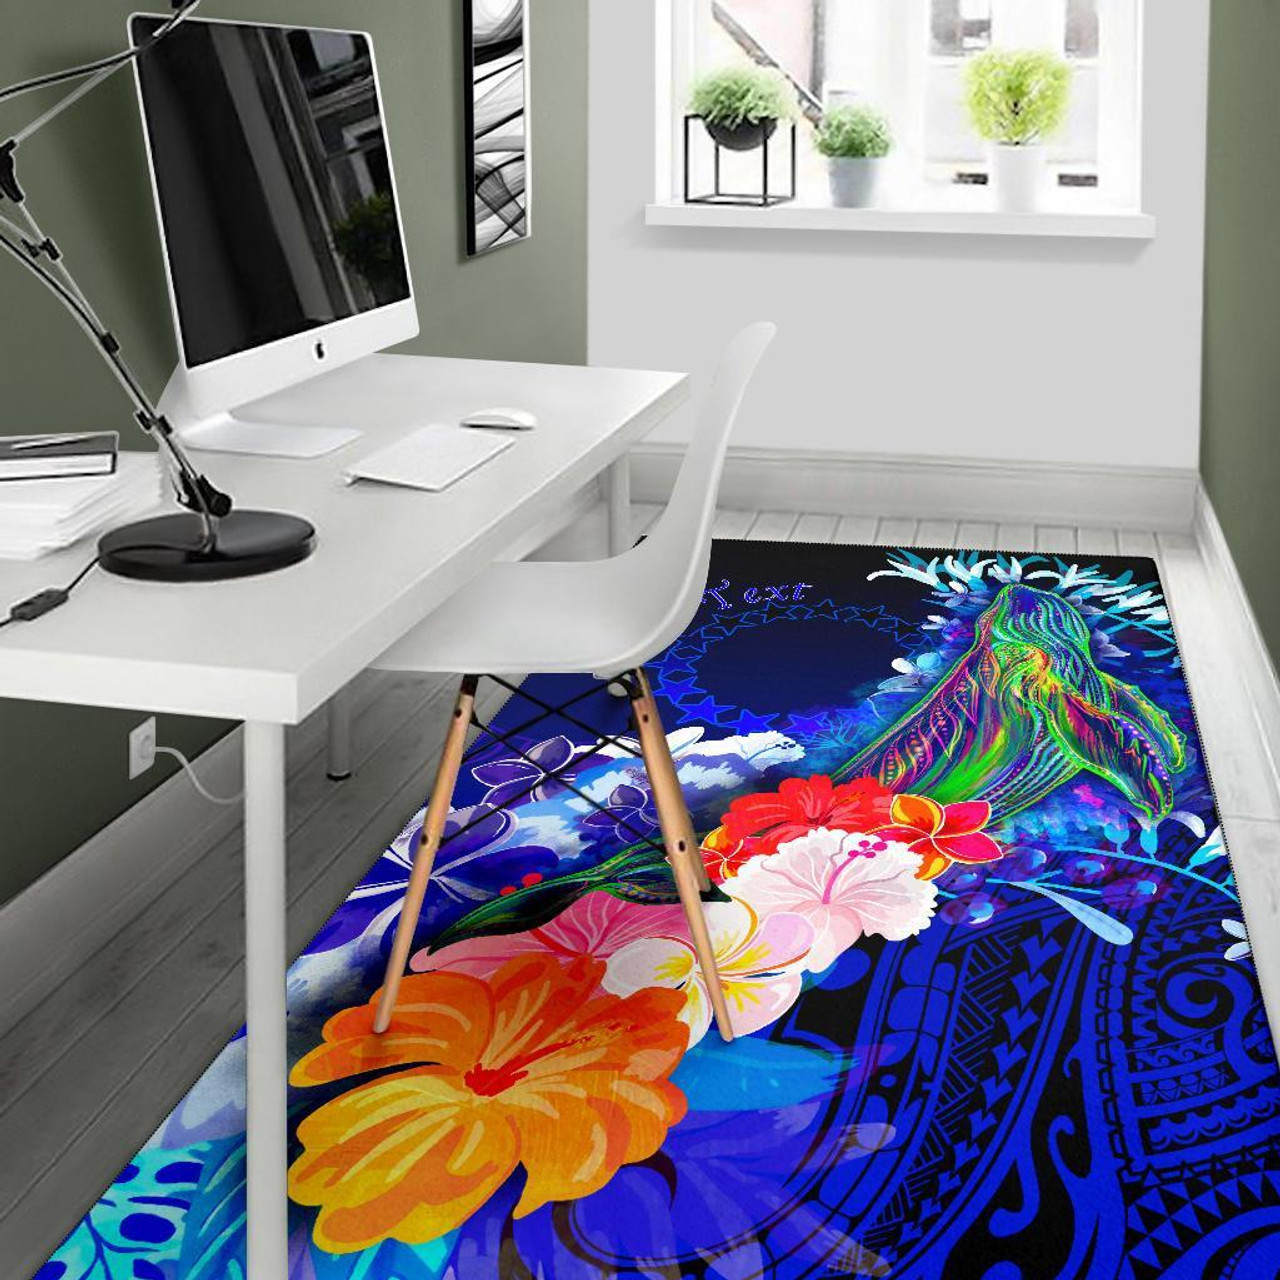 Cook Islands Custom Personalised Area Rug - Humpback Whale with Tropical Flowers (Blue) Polynesian 5